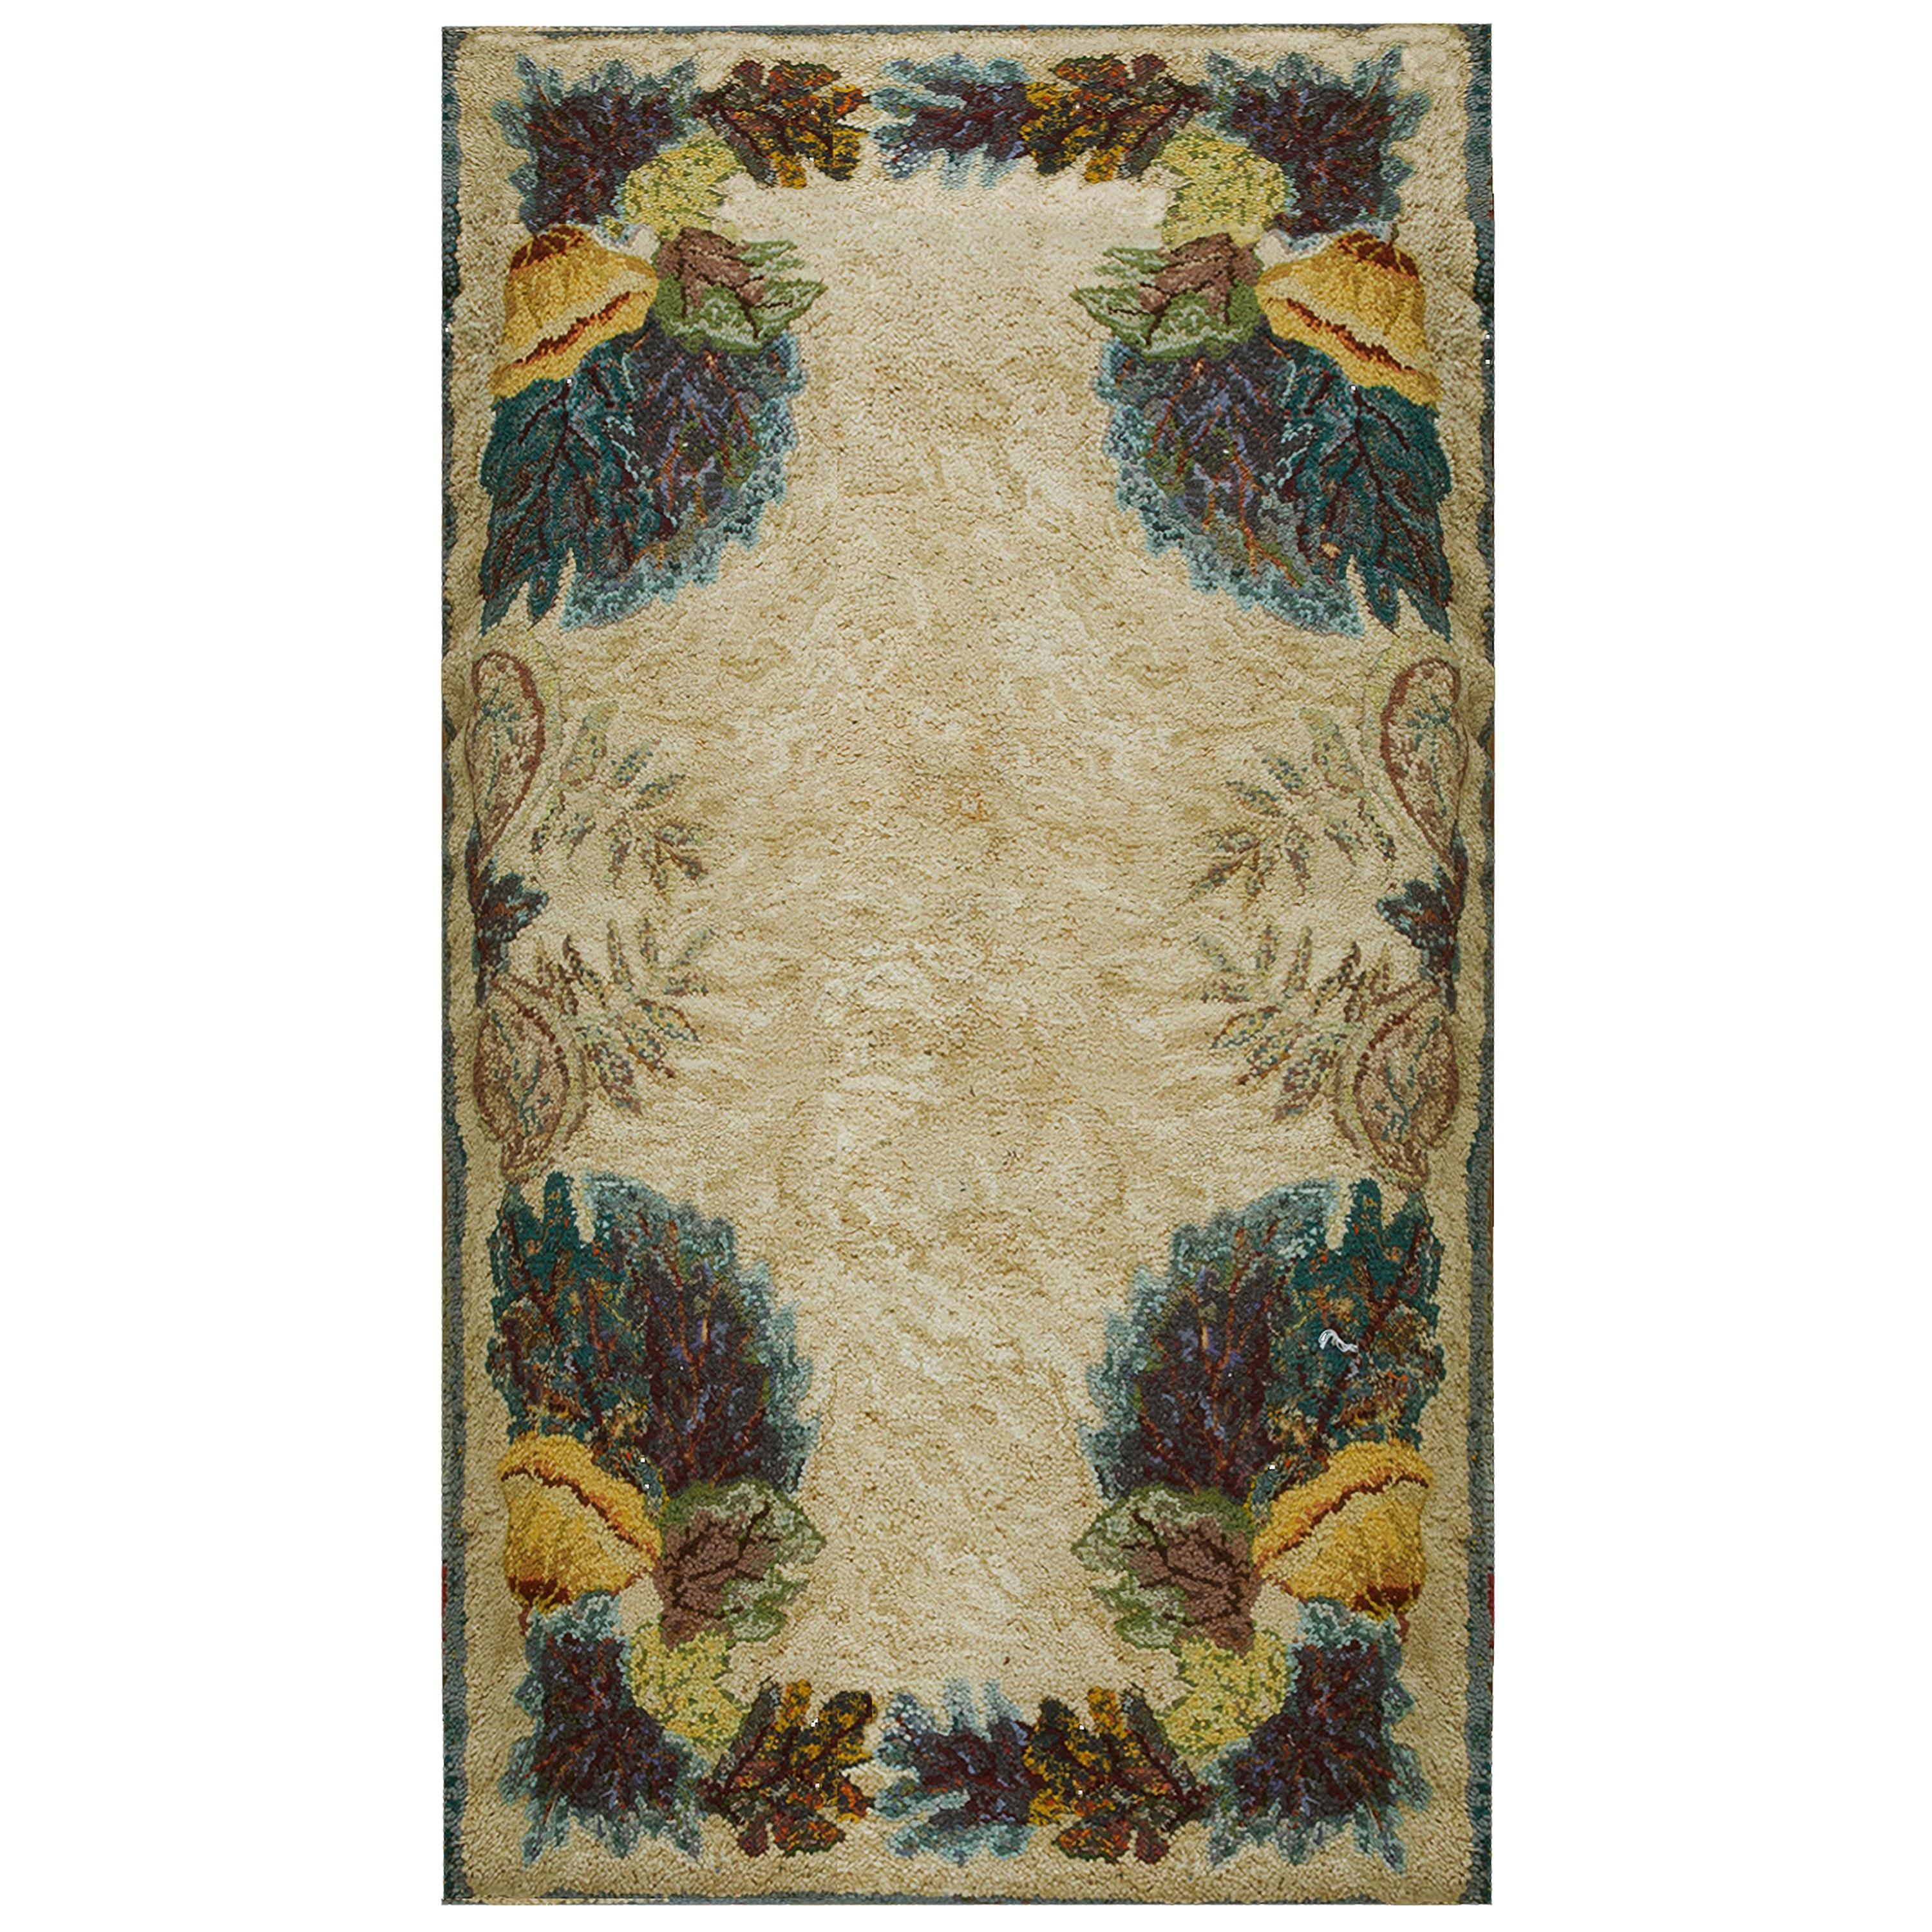 Early 20th Century American Hooked Rug ( 2'10" x 4'9" - 86 x 144 cm )